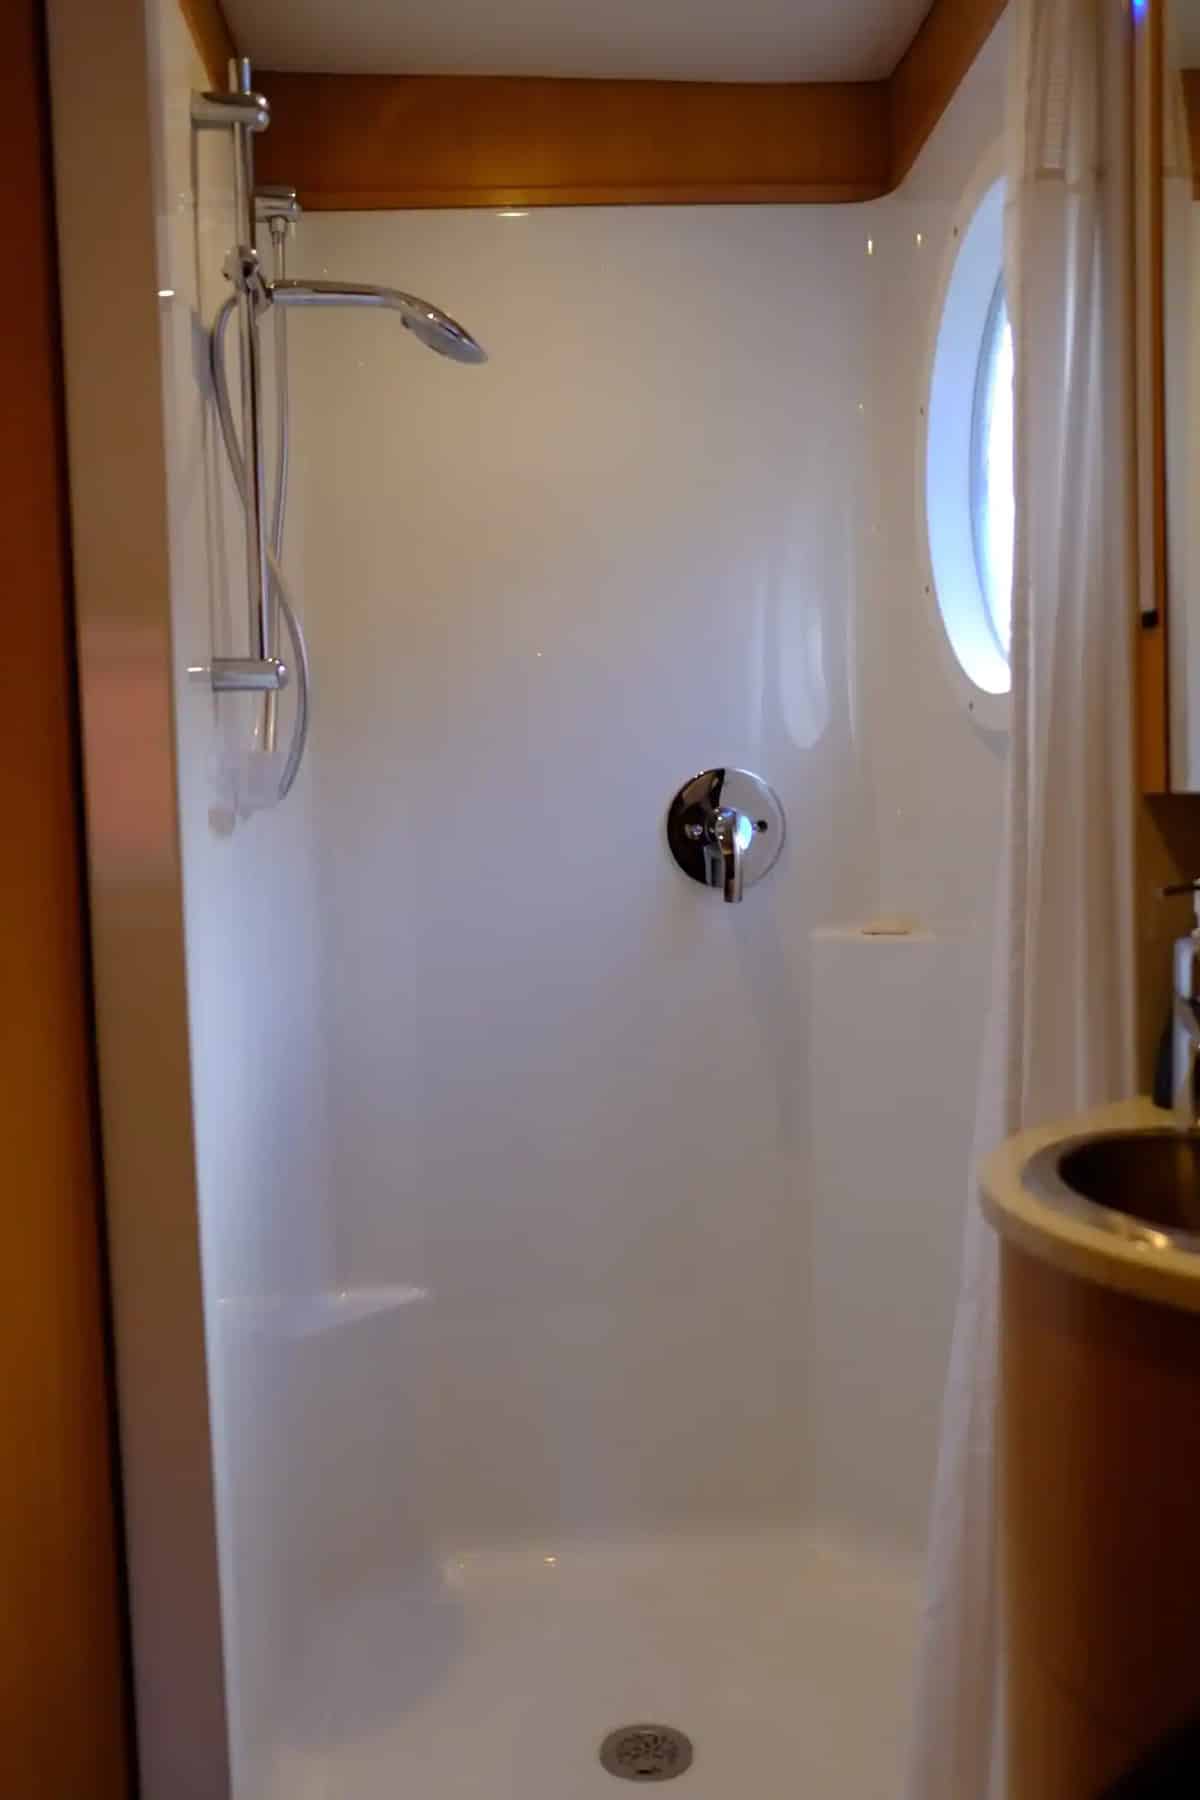 A large square shower stall with a large round "porthole" window ensures a comfortable shower experience while enjoying the serene surroundings.